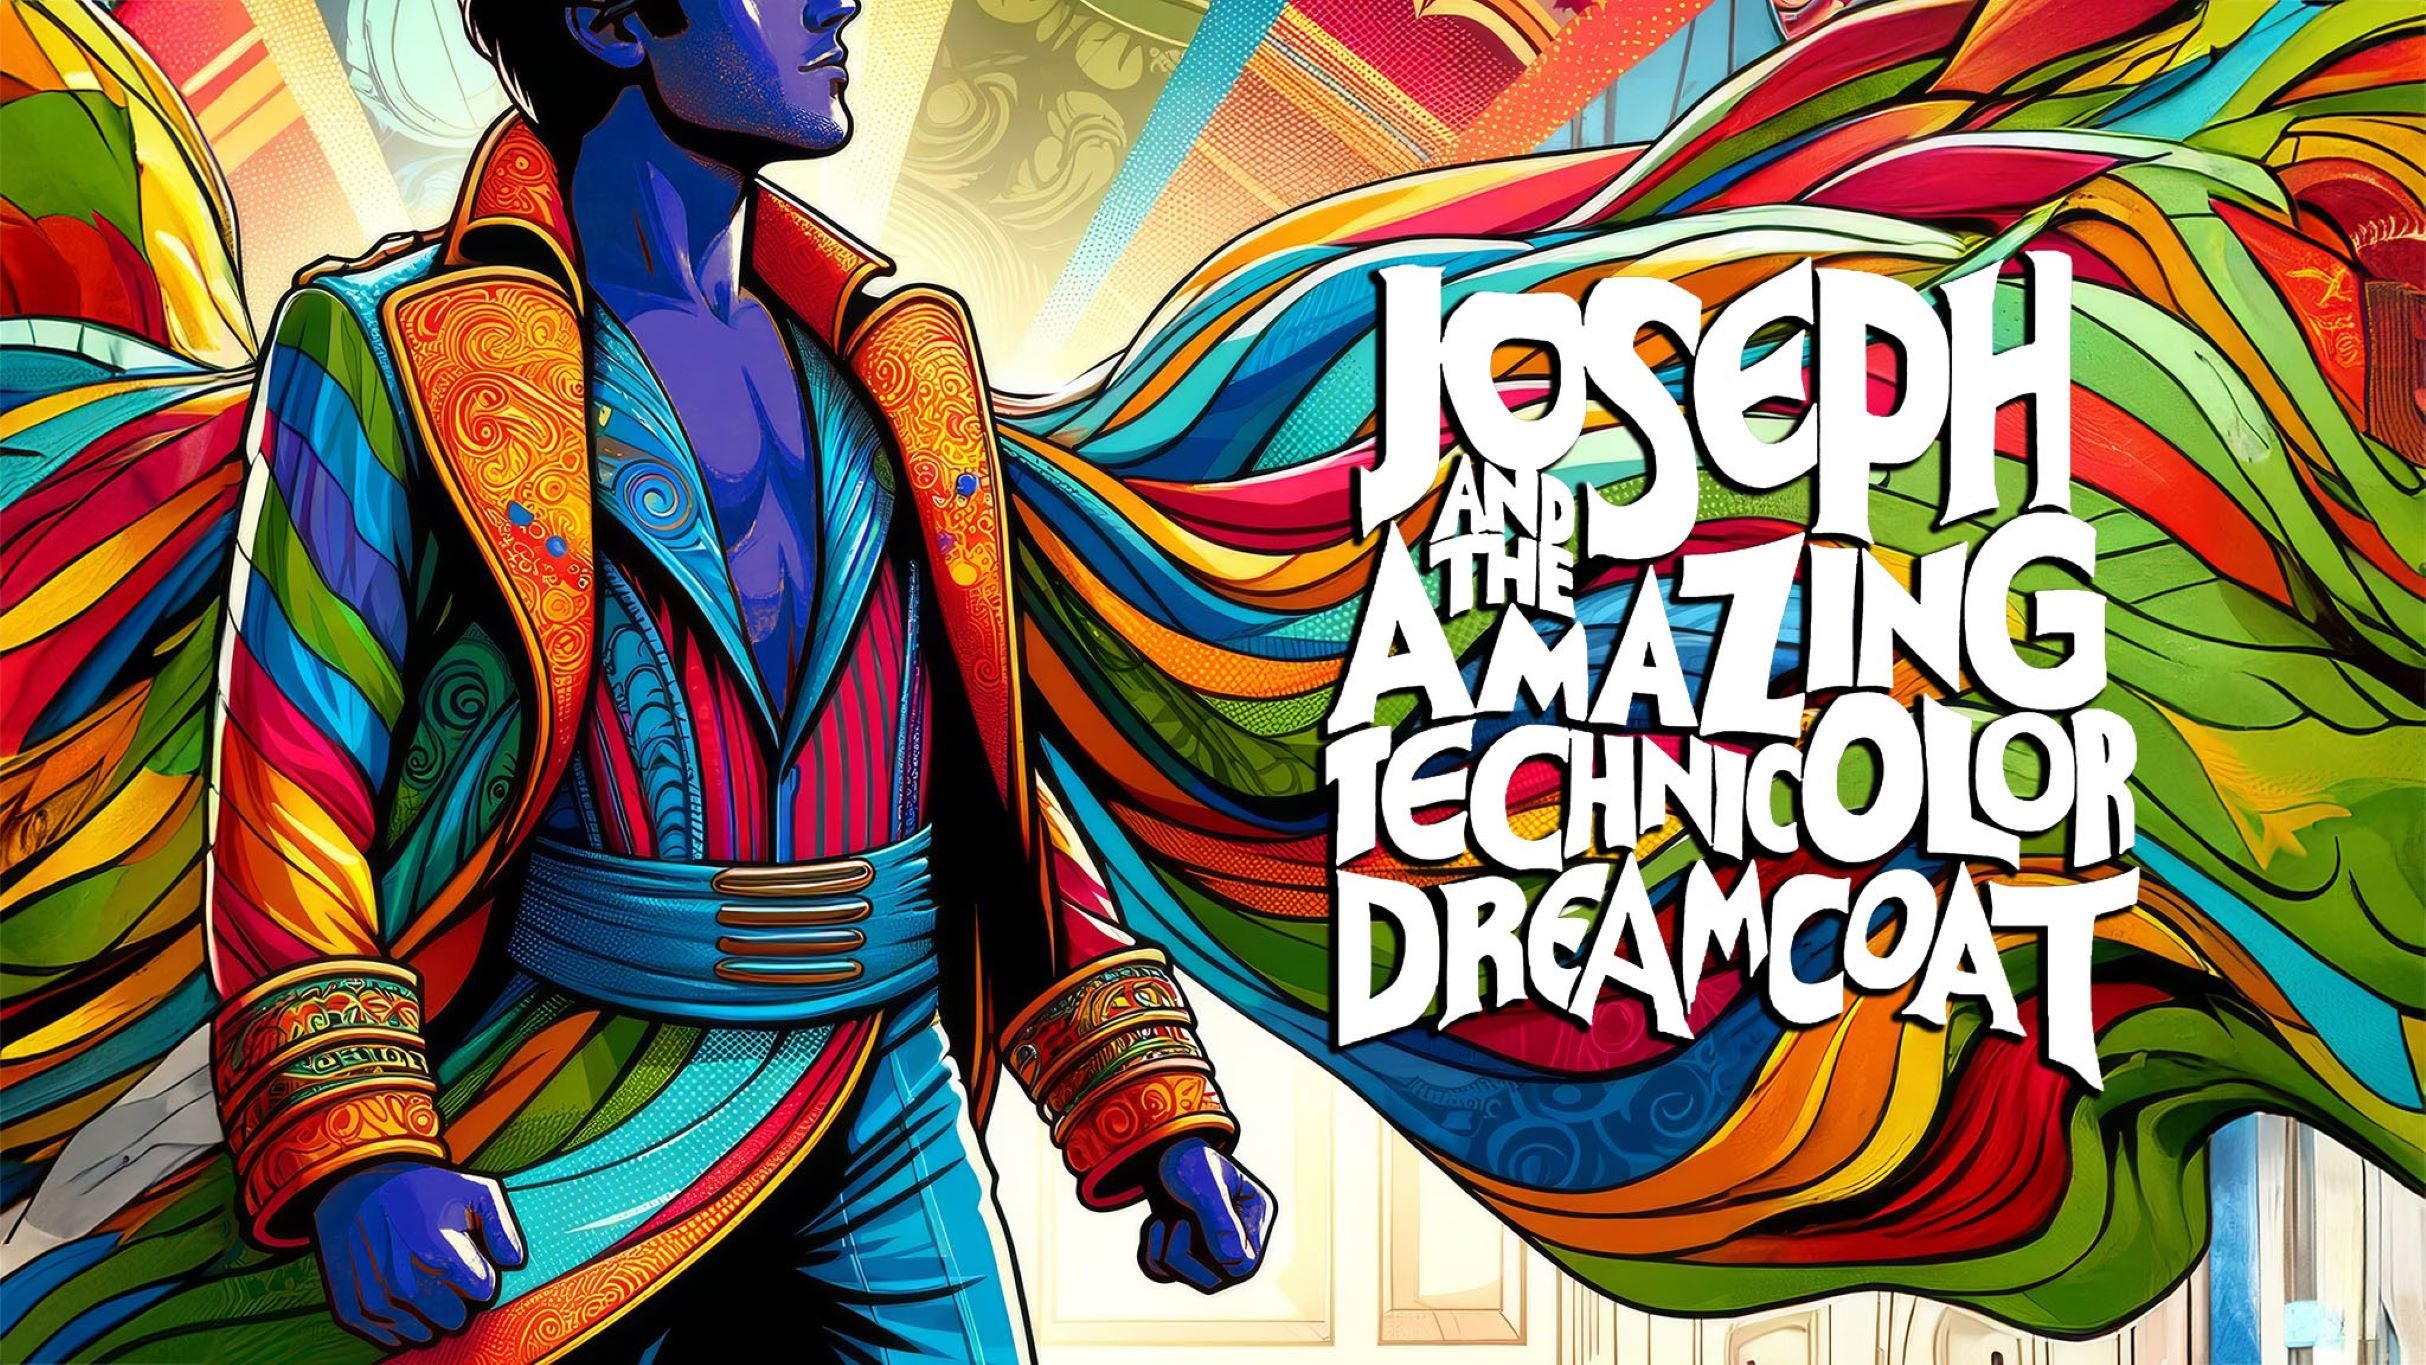 ACT Louisville Presents Joseph and the Amazing Technicolor Dreamcoat at Iroquois Amphitheater – Louisville, KY